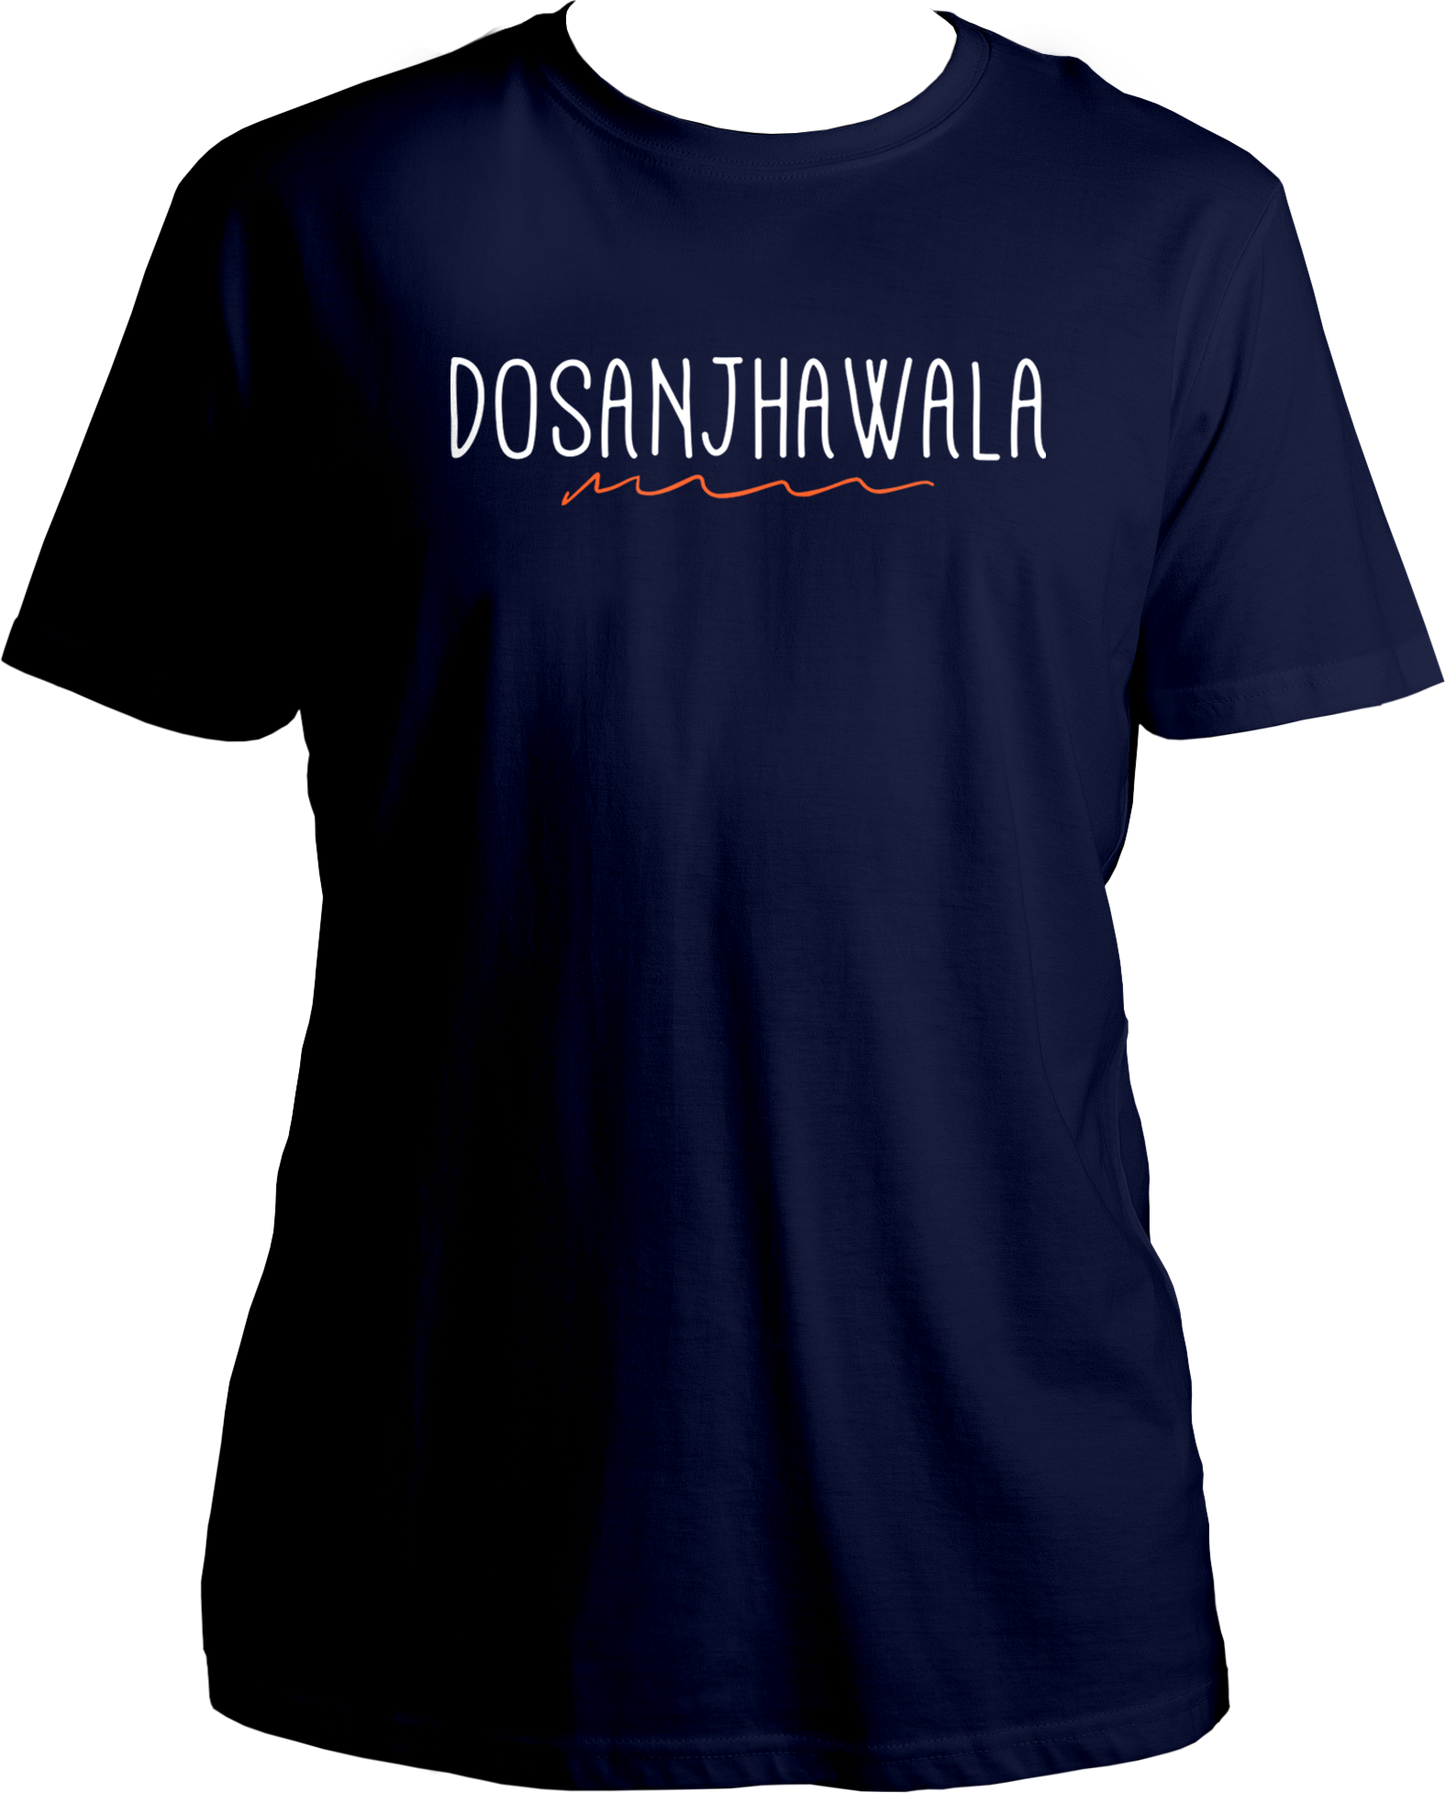 Introducing our exclusive DOSANJHAWALA Unisex T-Shirt, crafted for true fans of the legendary Diljit Dosanjh! Made from pure cotton for ultimate comfort, this tee is not just a piece of clothing but a symbol of admiration for Diljit's unmatched talent and charisma.